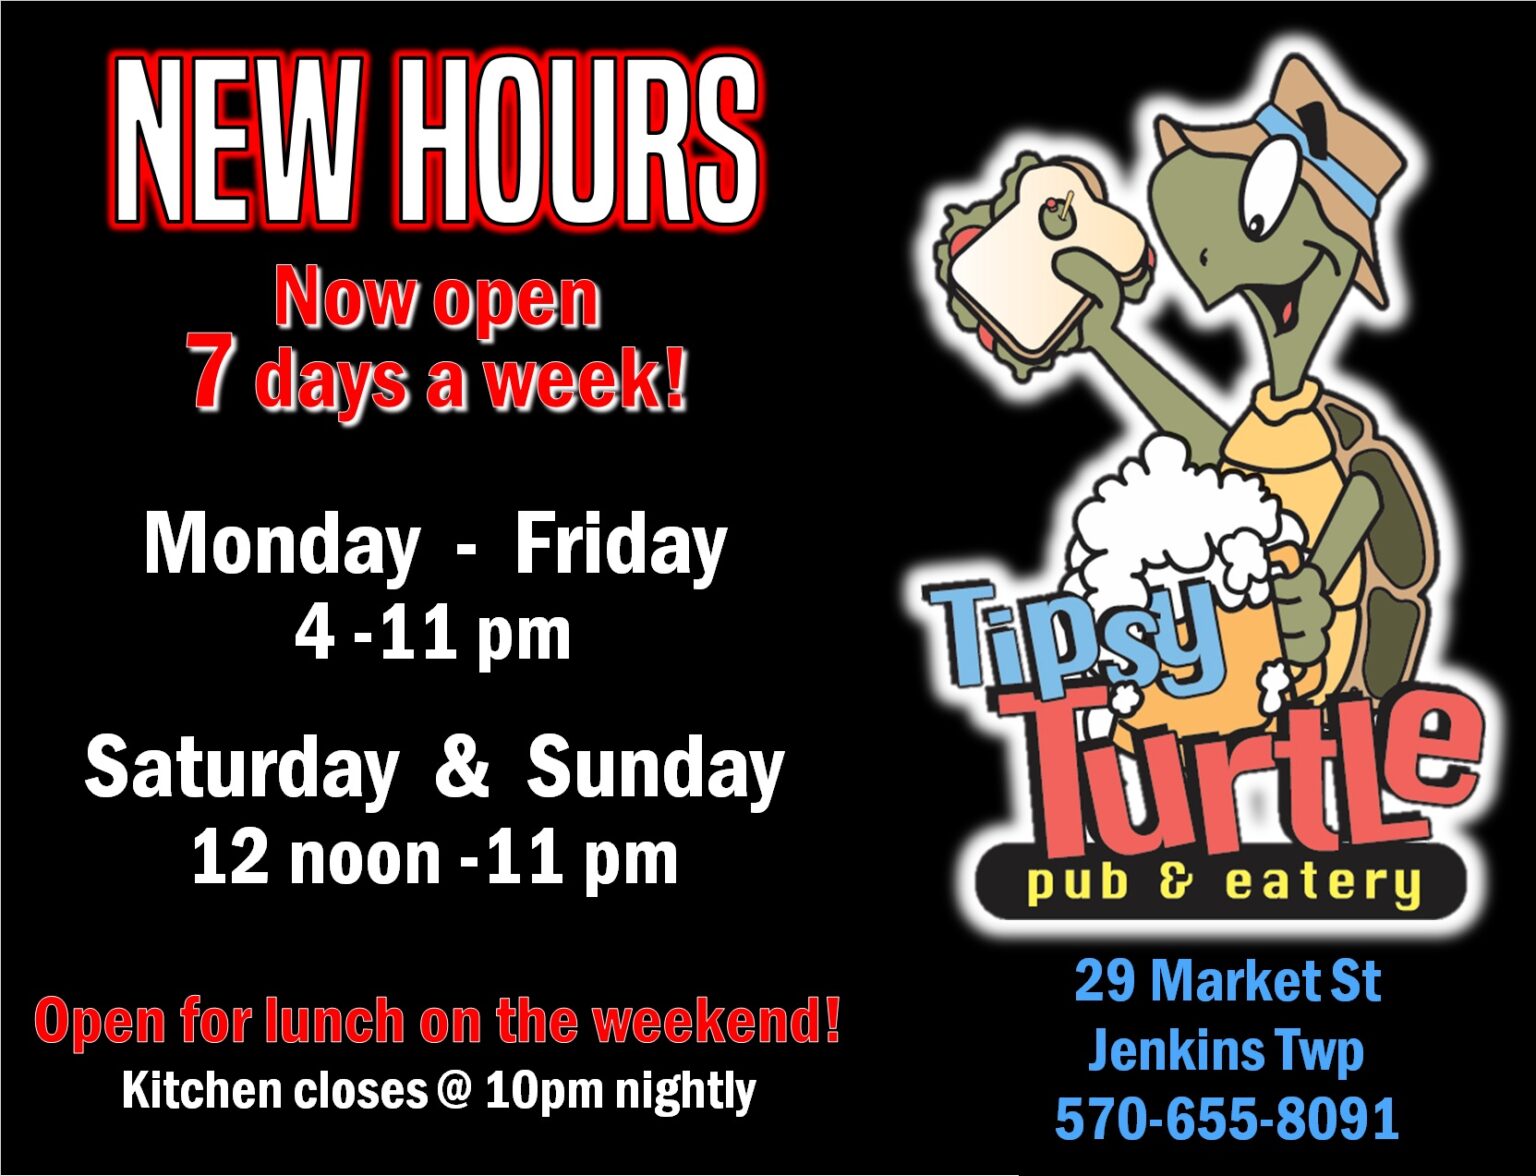 open 7 days a week - Monday - Friday 4-11PM Saturday & Sunday 12noon - 11pm